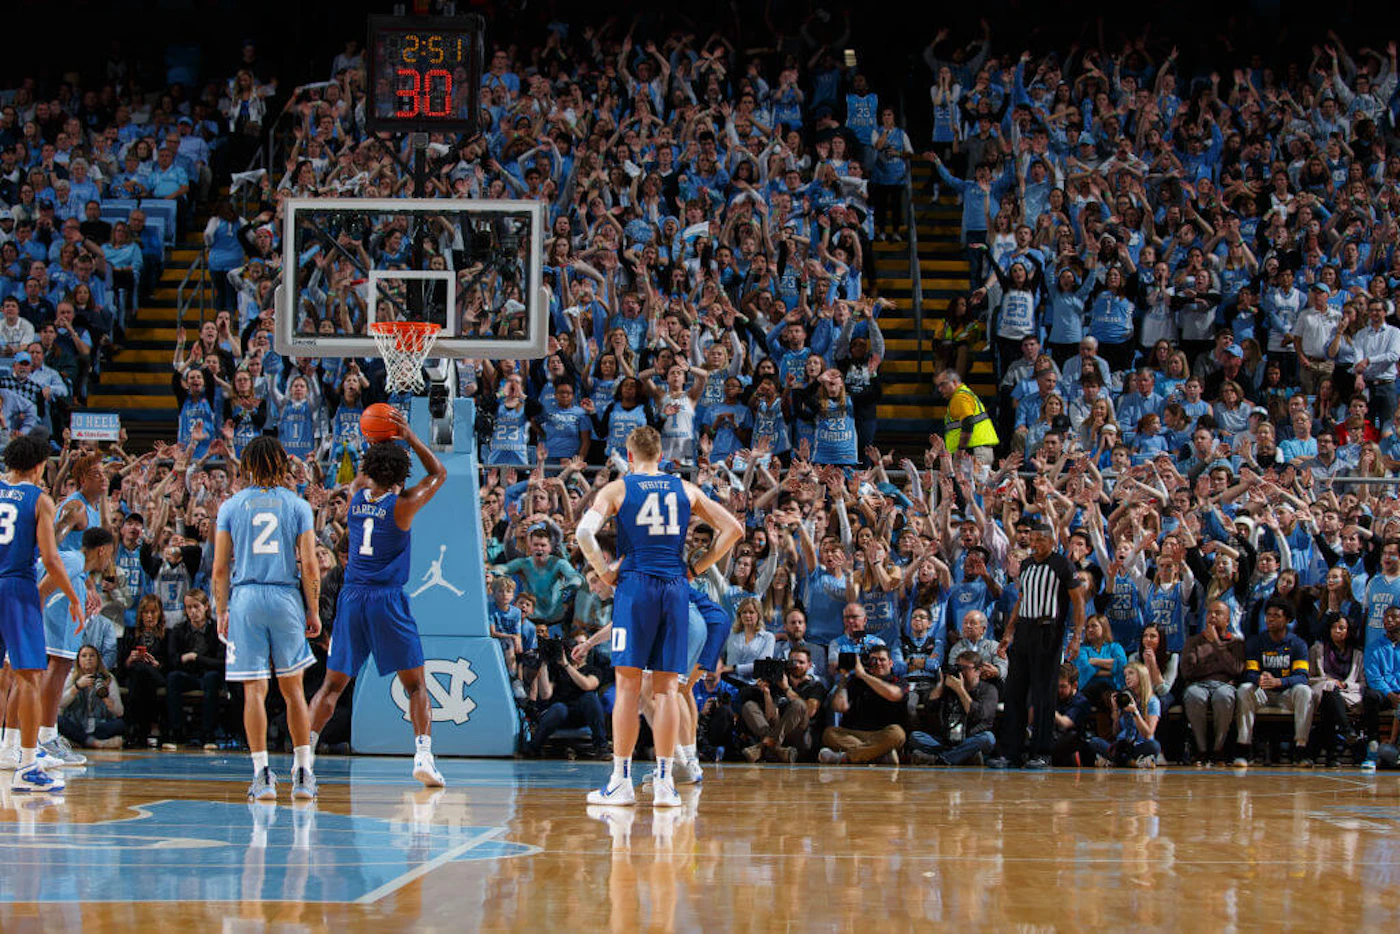 Duke and UNC-Chapel Hill square off in February in Chapel Hill. College basketball is expected to return in the coming days, although the pandemic will blunt the economic impact. (Photo by Peyton Williams/UNC/Getty Images)